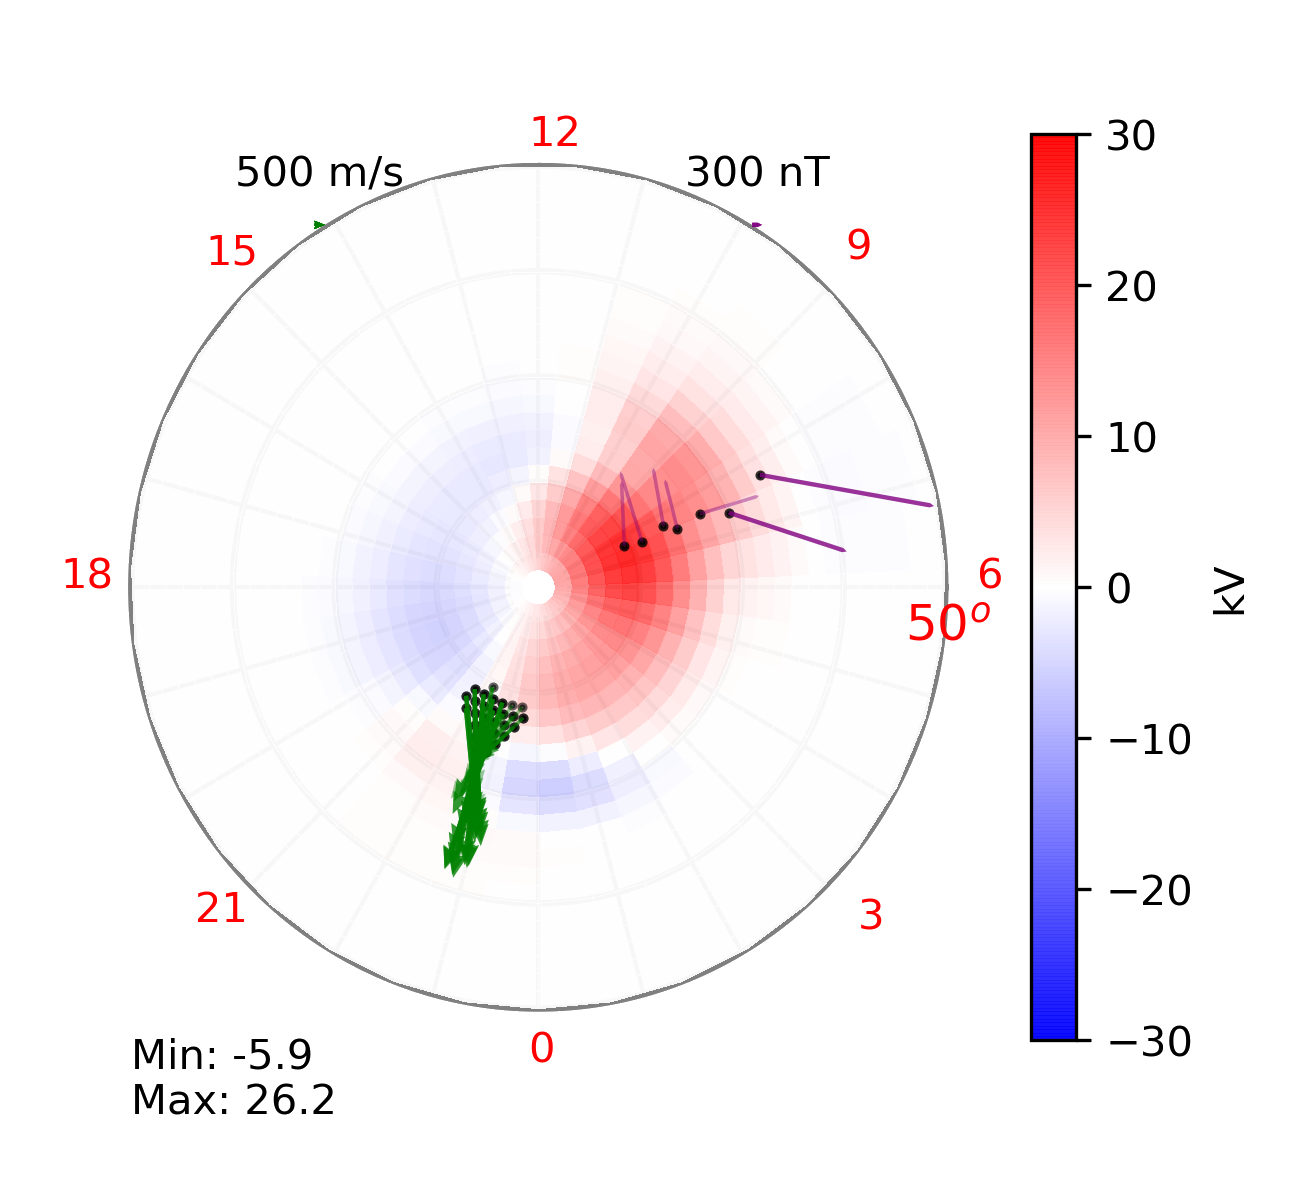 Here, SuperMAG and SuperDARN observational data is shown as well as the generated electric potential plot from these two data sets. This generated electric potential plot is the contribution of the SuperMAG and SuperDARN data to the creation of the electrostatic potential AMGeO map.